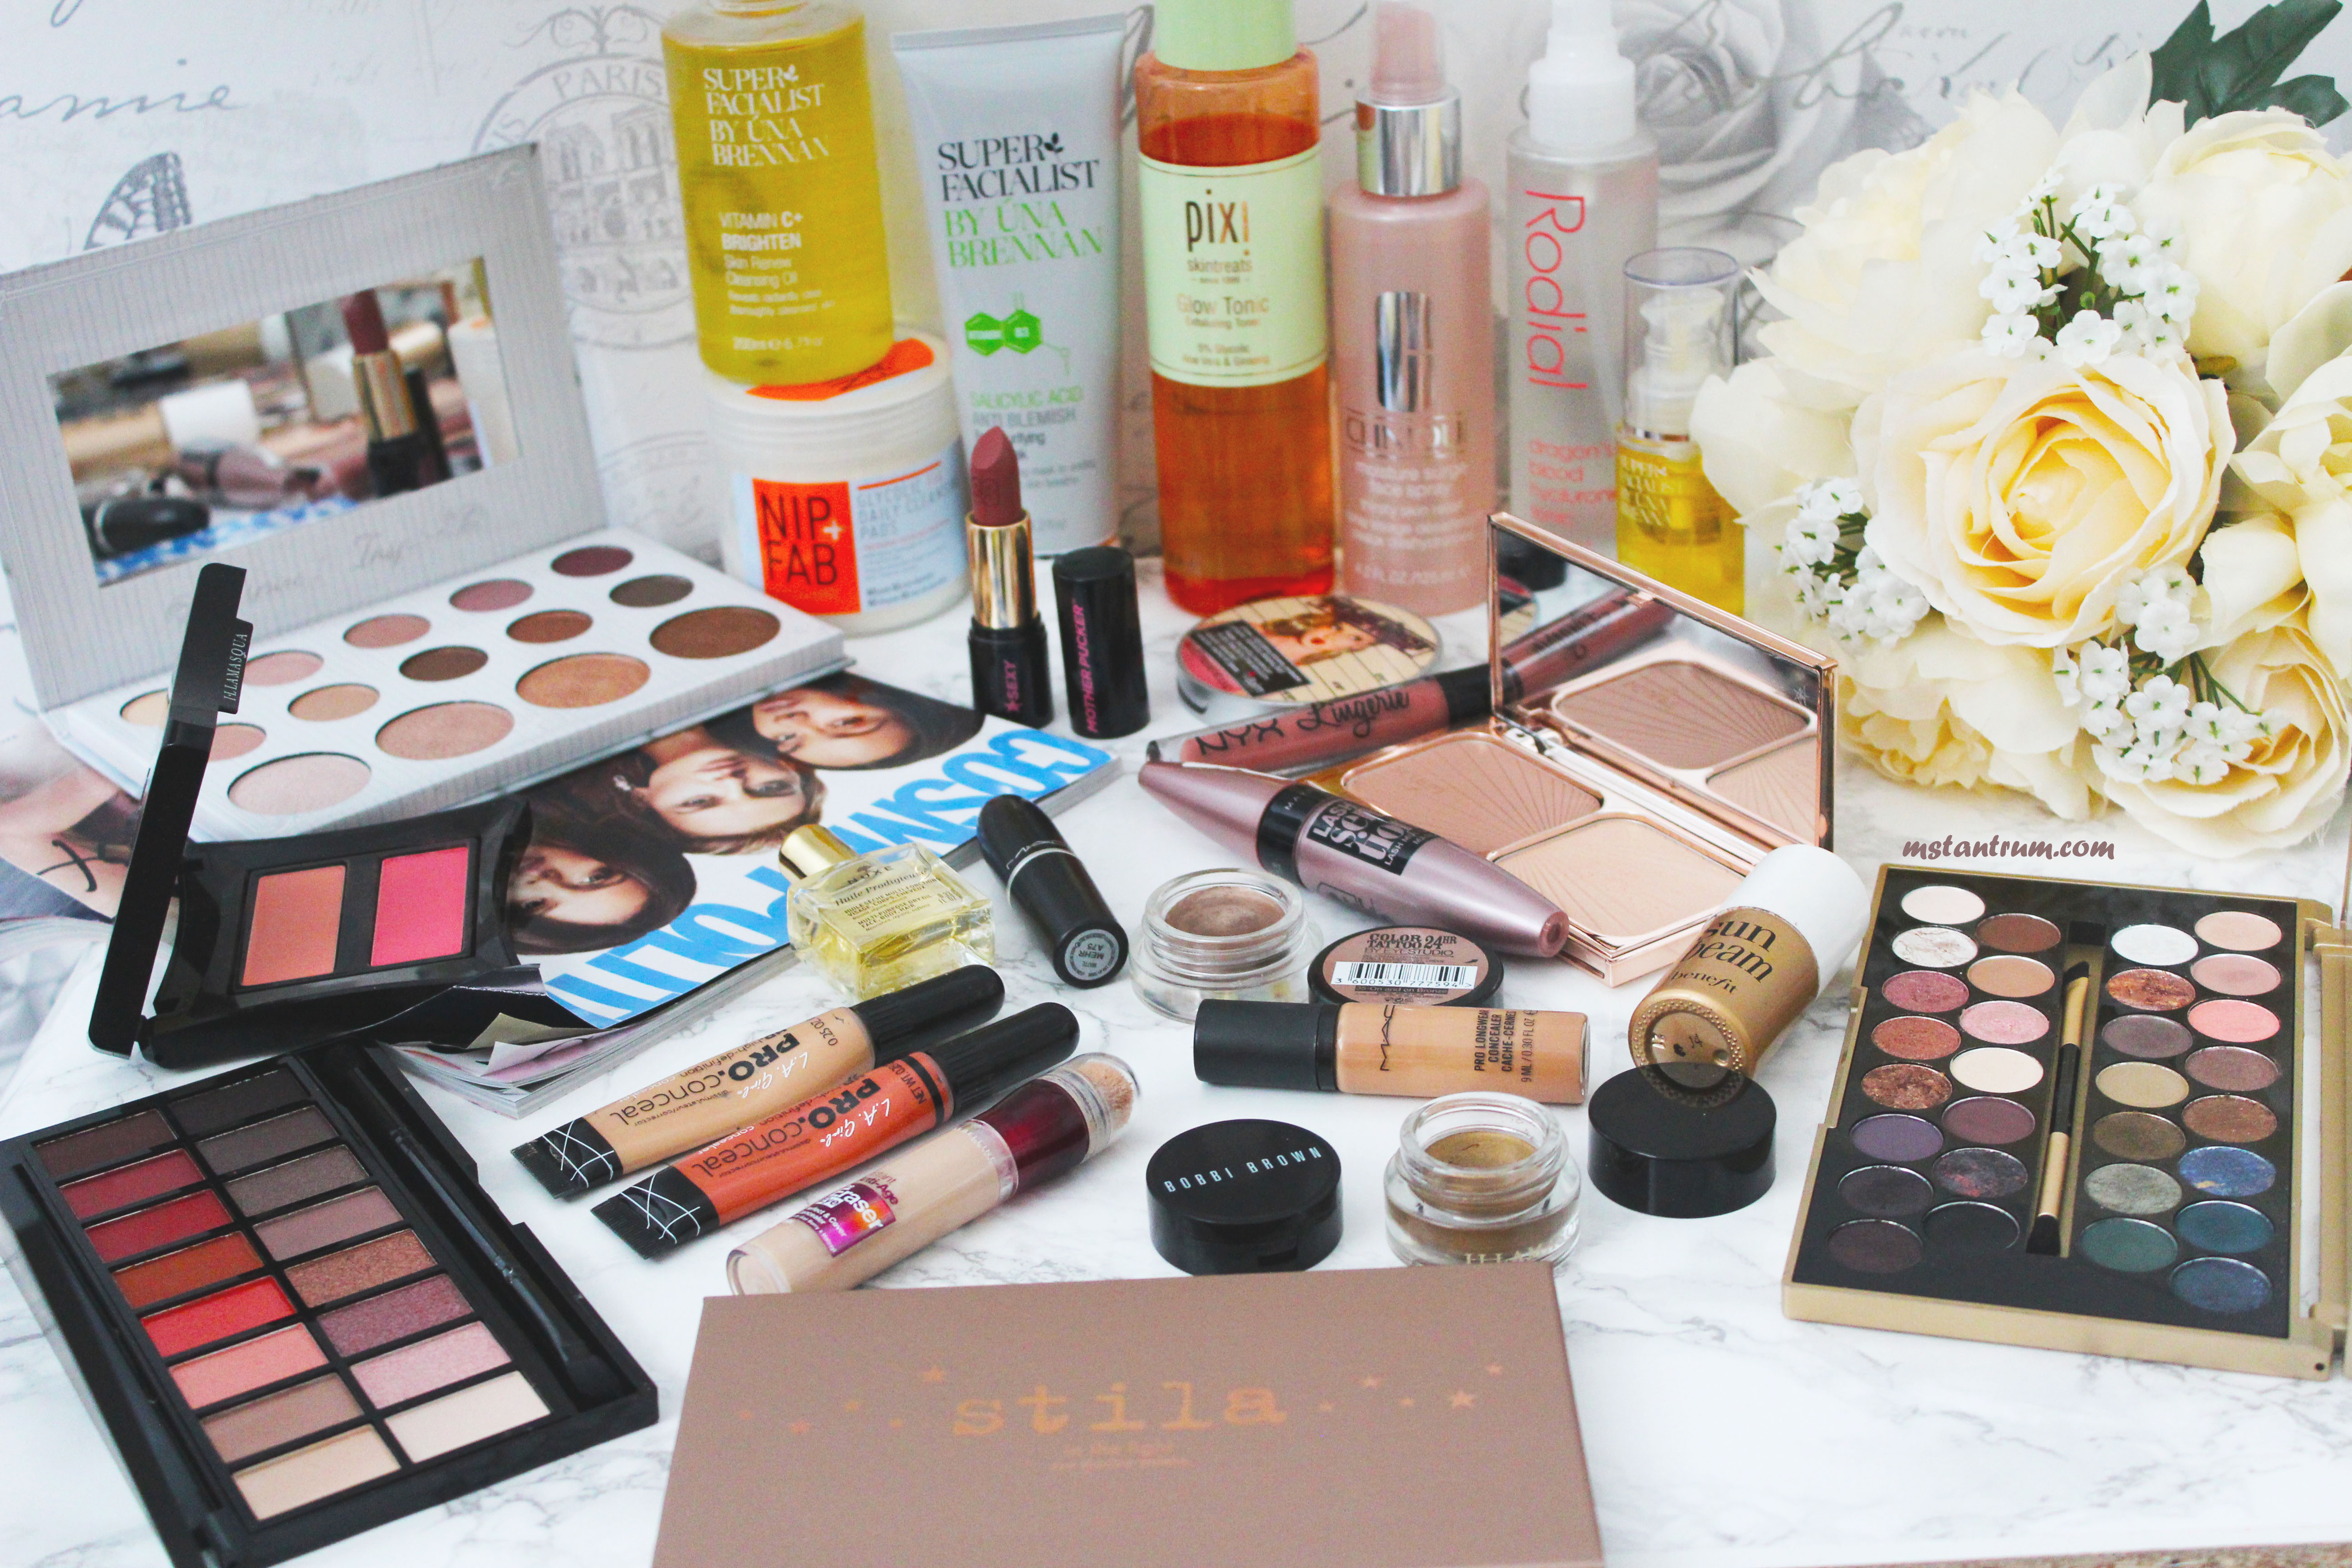 The beauty lover tag